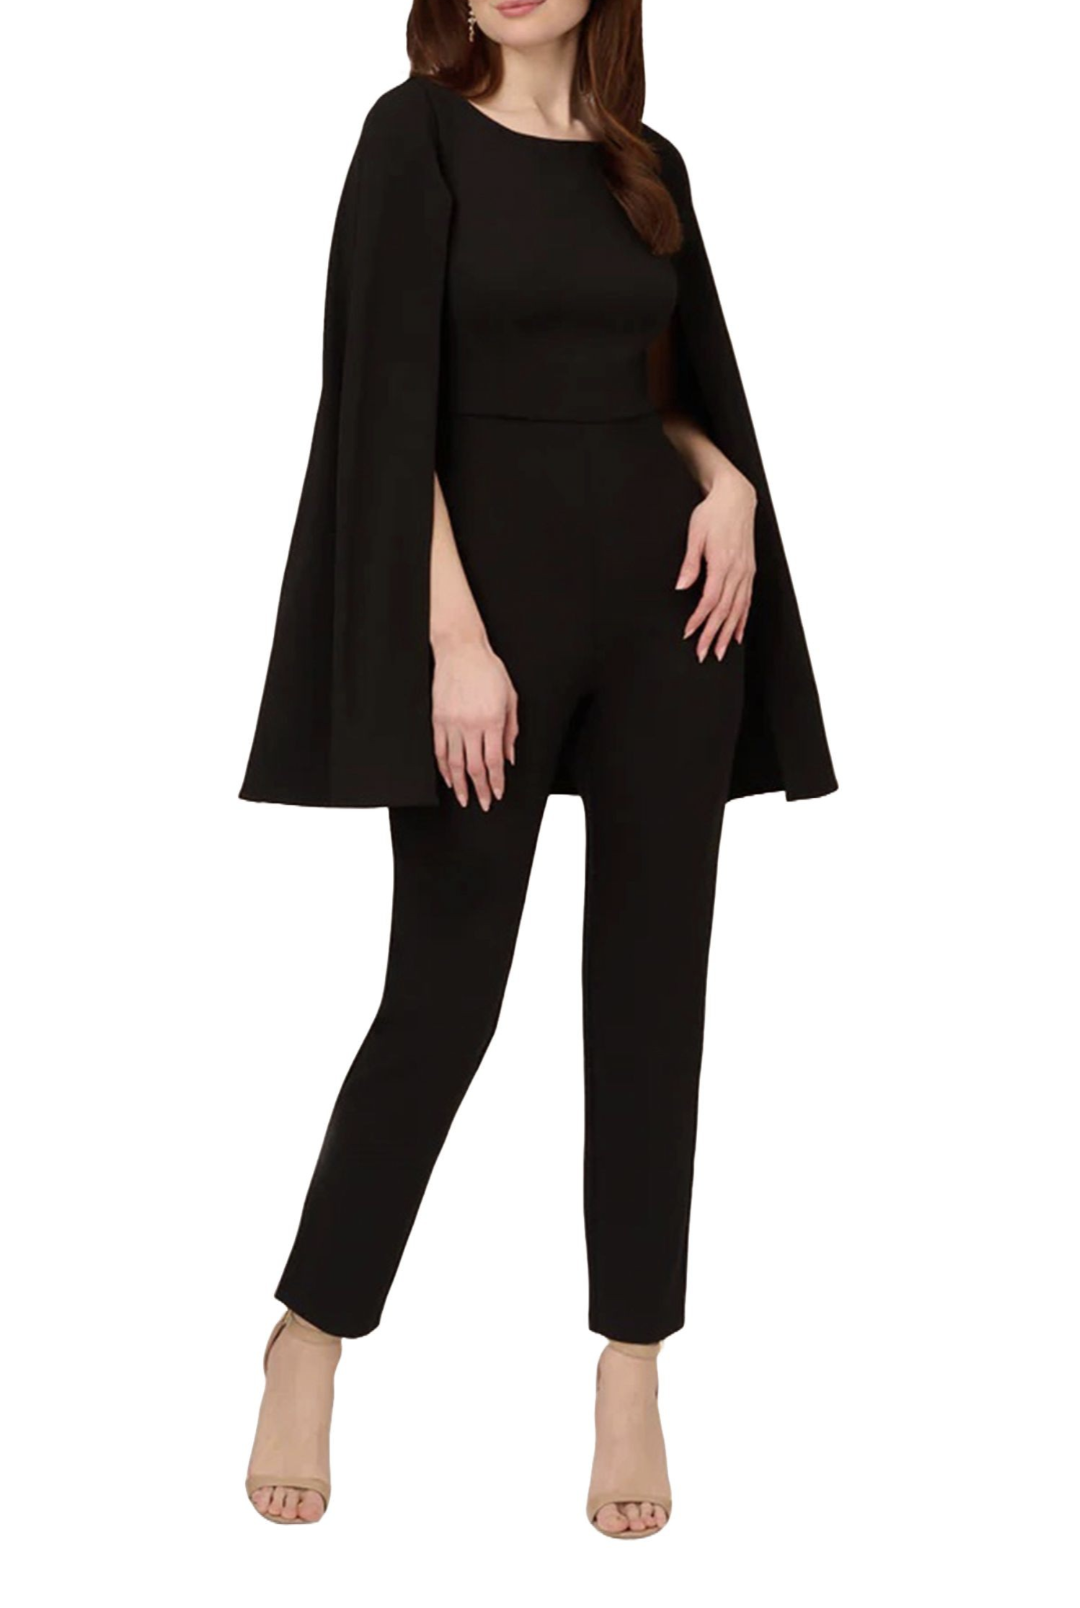 Adrianna Papell Crepe Jumpsuit with Cape